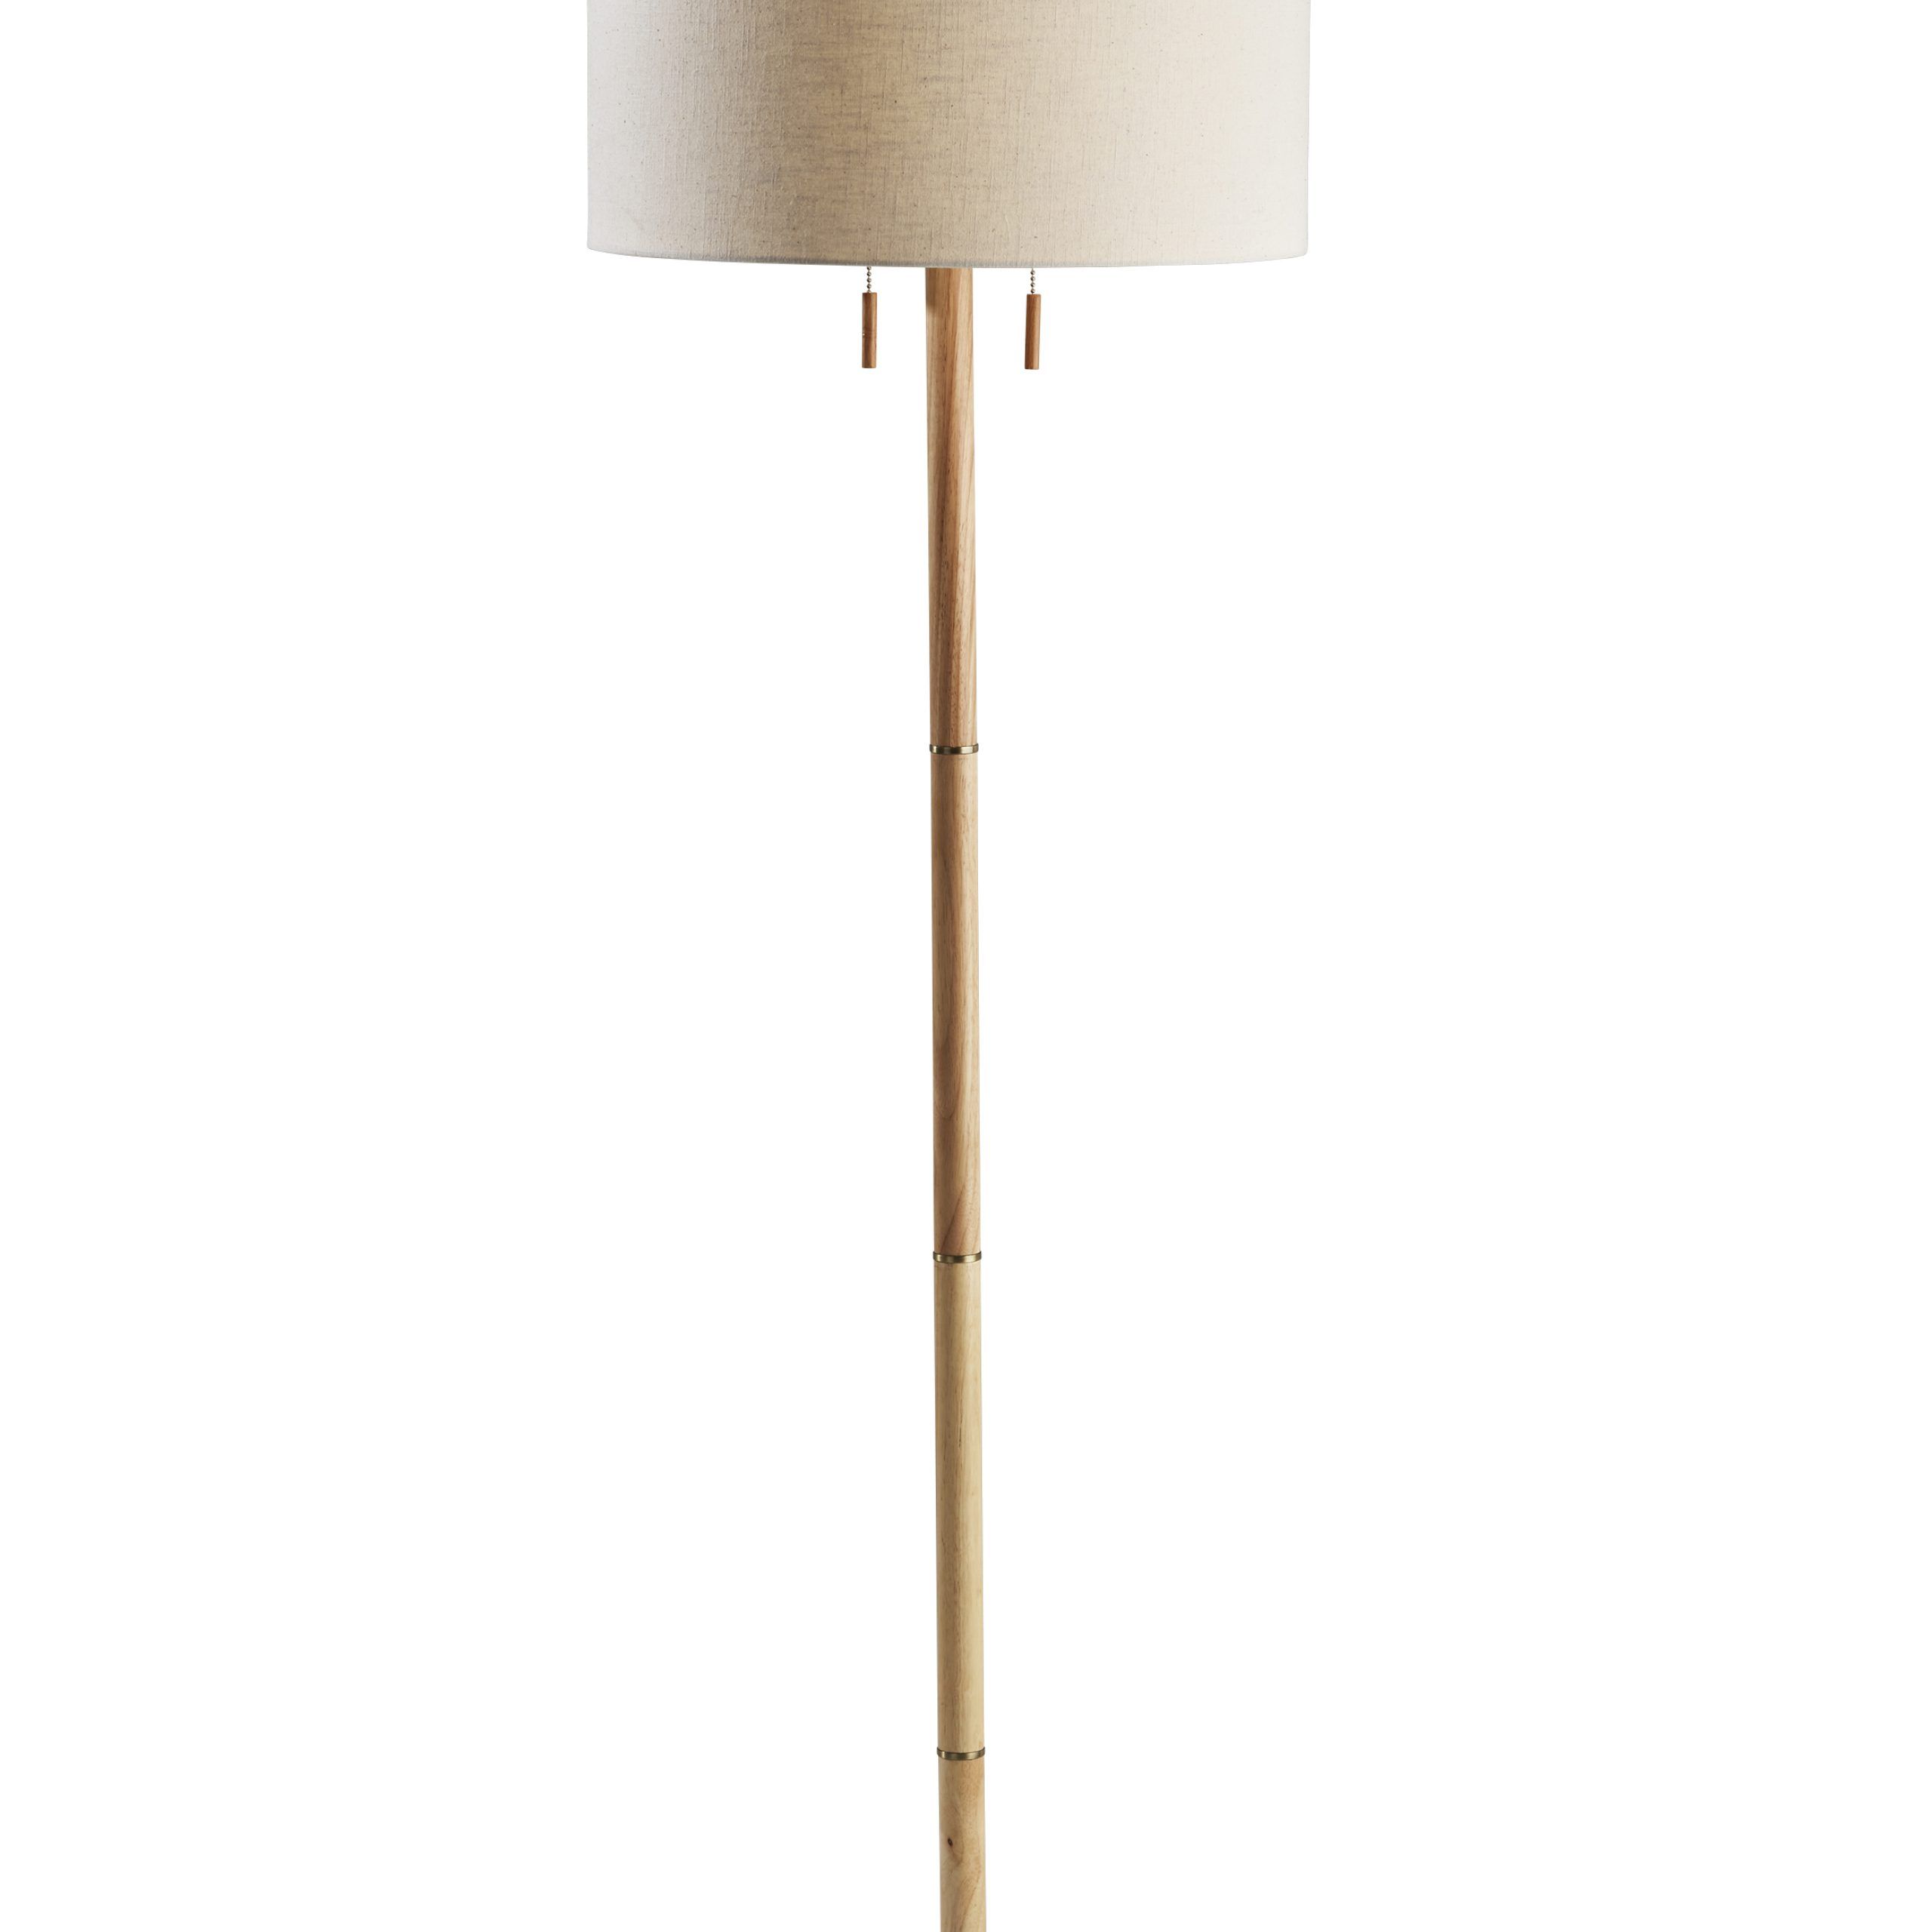 Most Popular Rubberwood Floor Lamps Within Adesso Madeline Floor Lamp, Natural Rubberwood Base & Antique Brass, Wood  Base, Off White Textured Fabric Shade – Walmart (View 9 of 15)